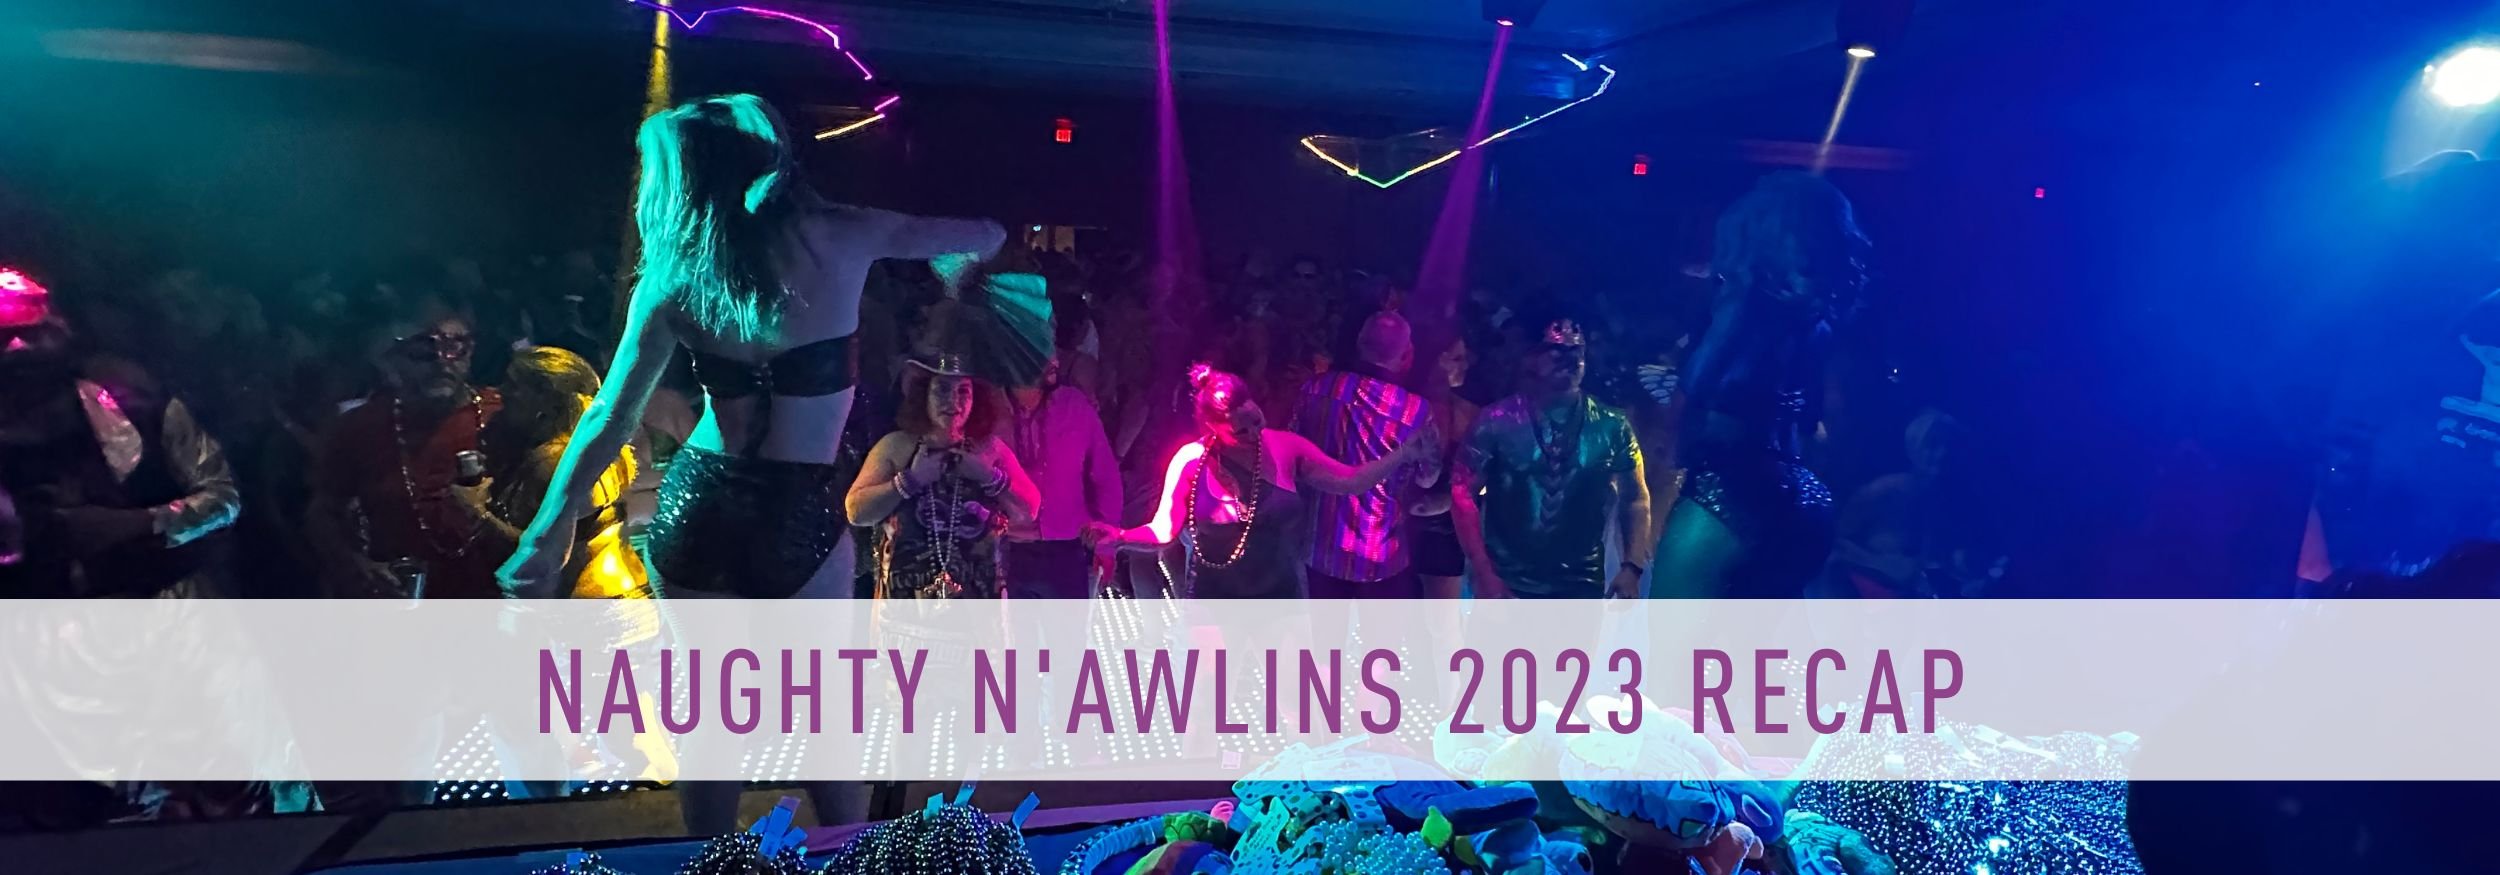 Inside Naughty Nawlins 2023 25th Anniversary — NAUGHTY EVENTS picture